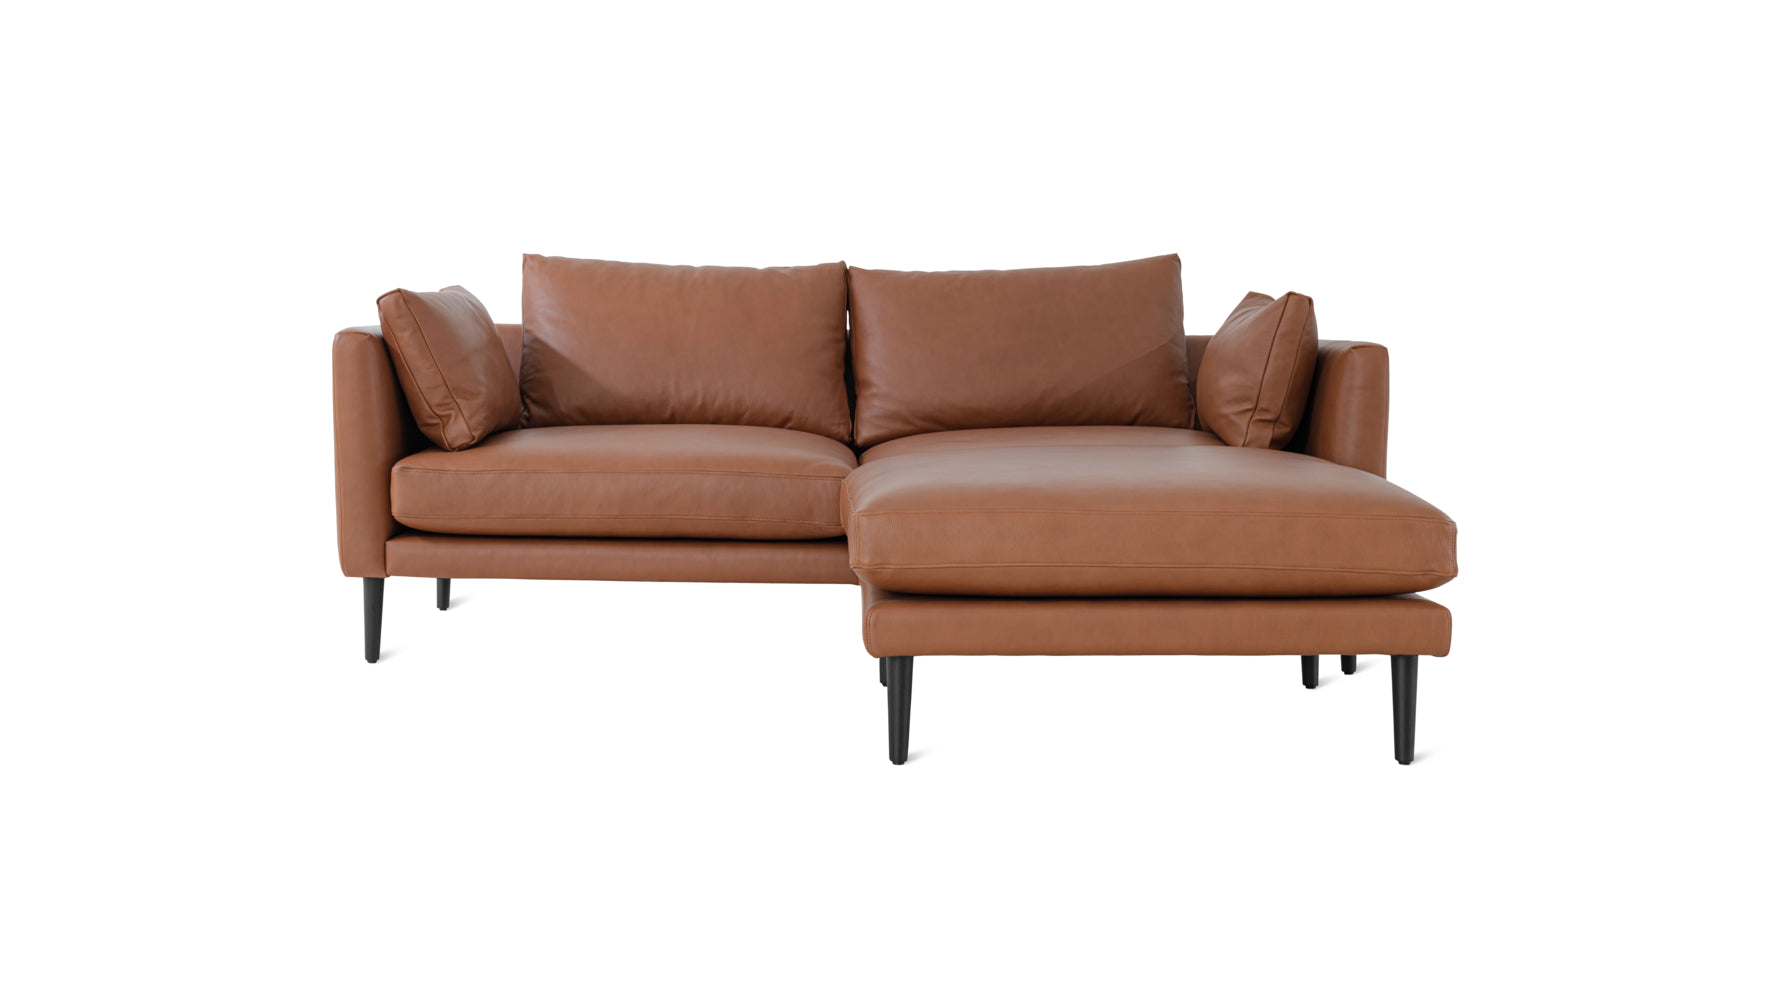 Stay A While Sectional, 2.5 Seater, Cigar - Image 1